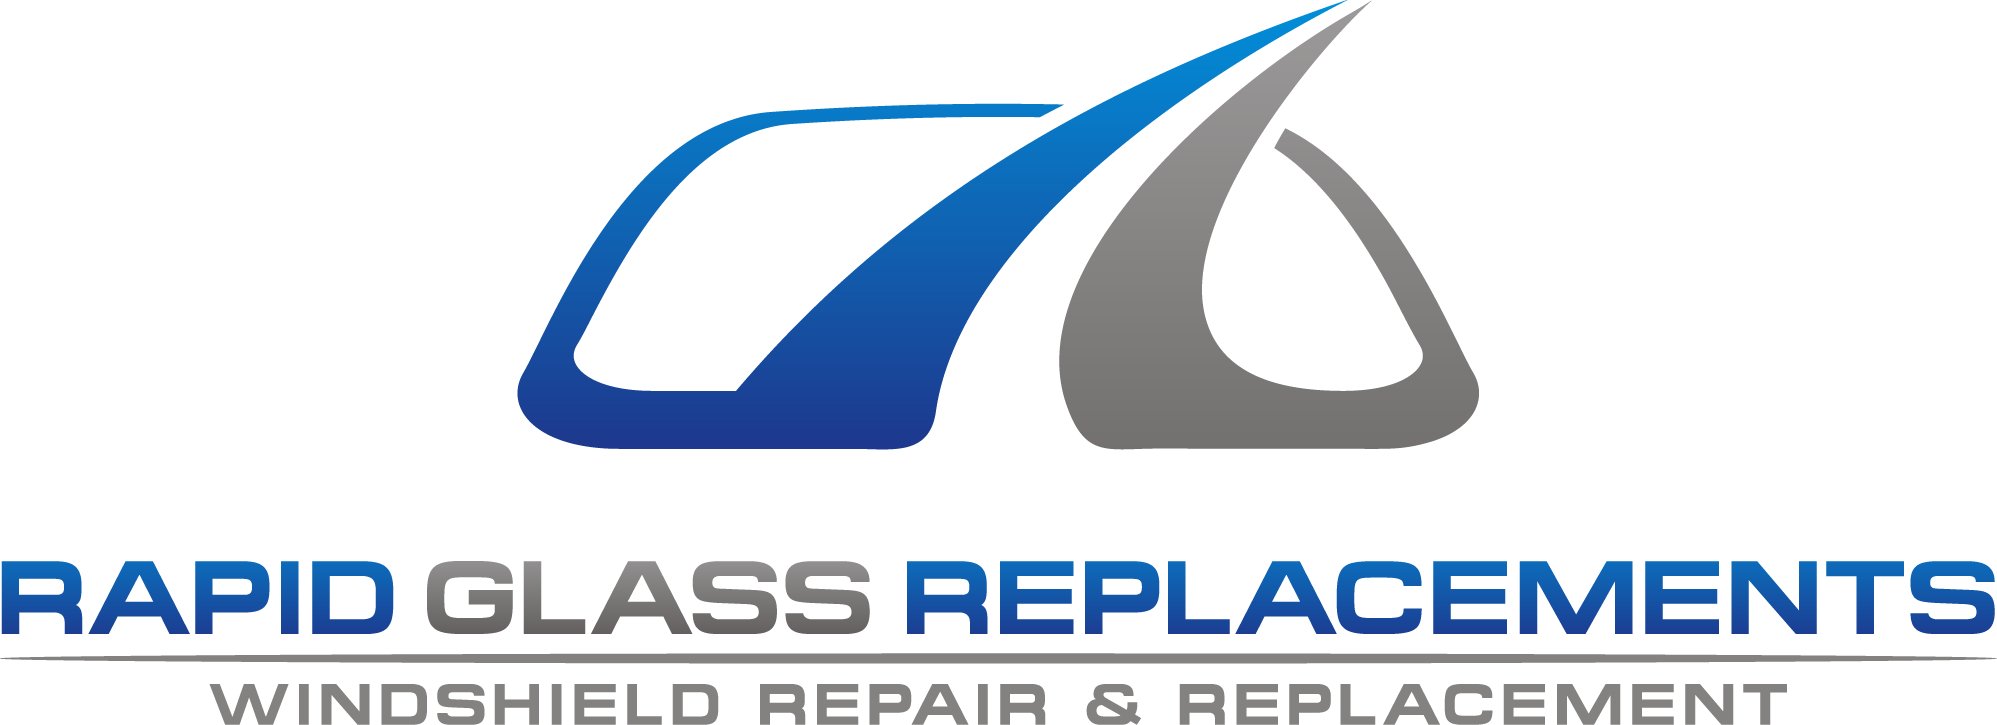 Company logo of Glass Replacements, LLC